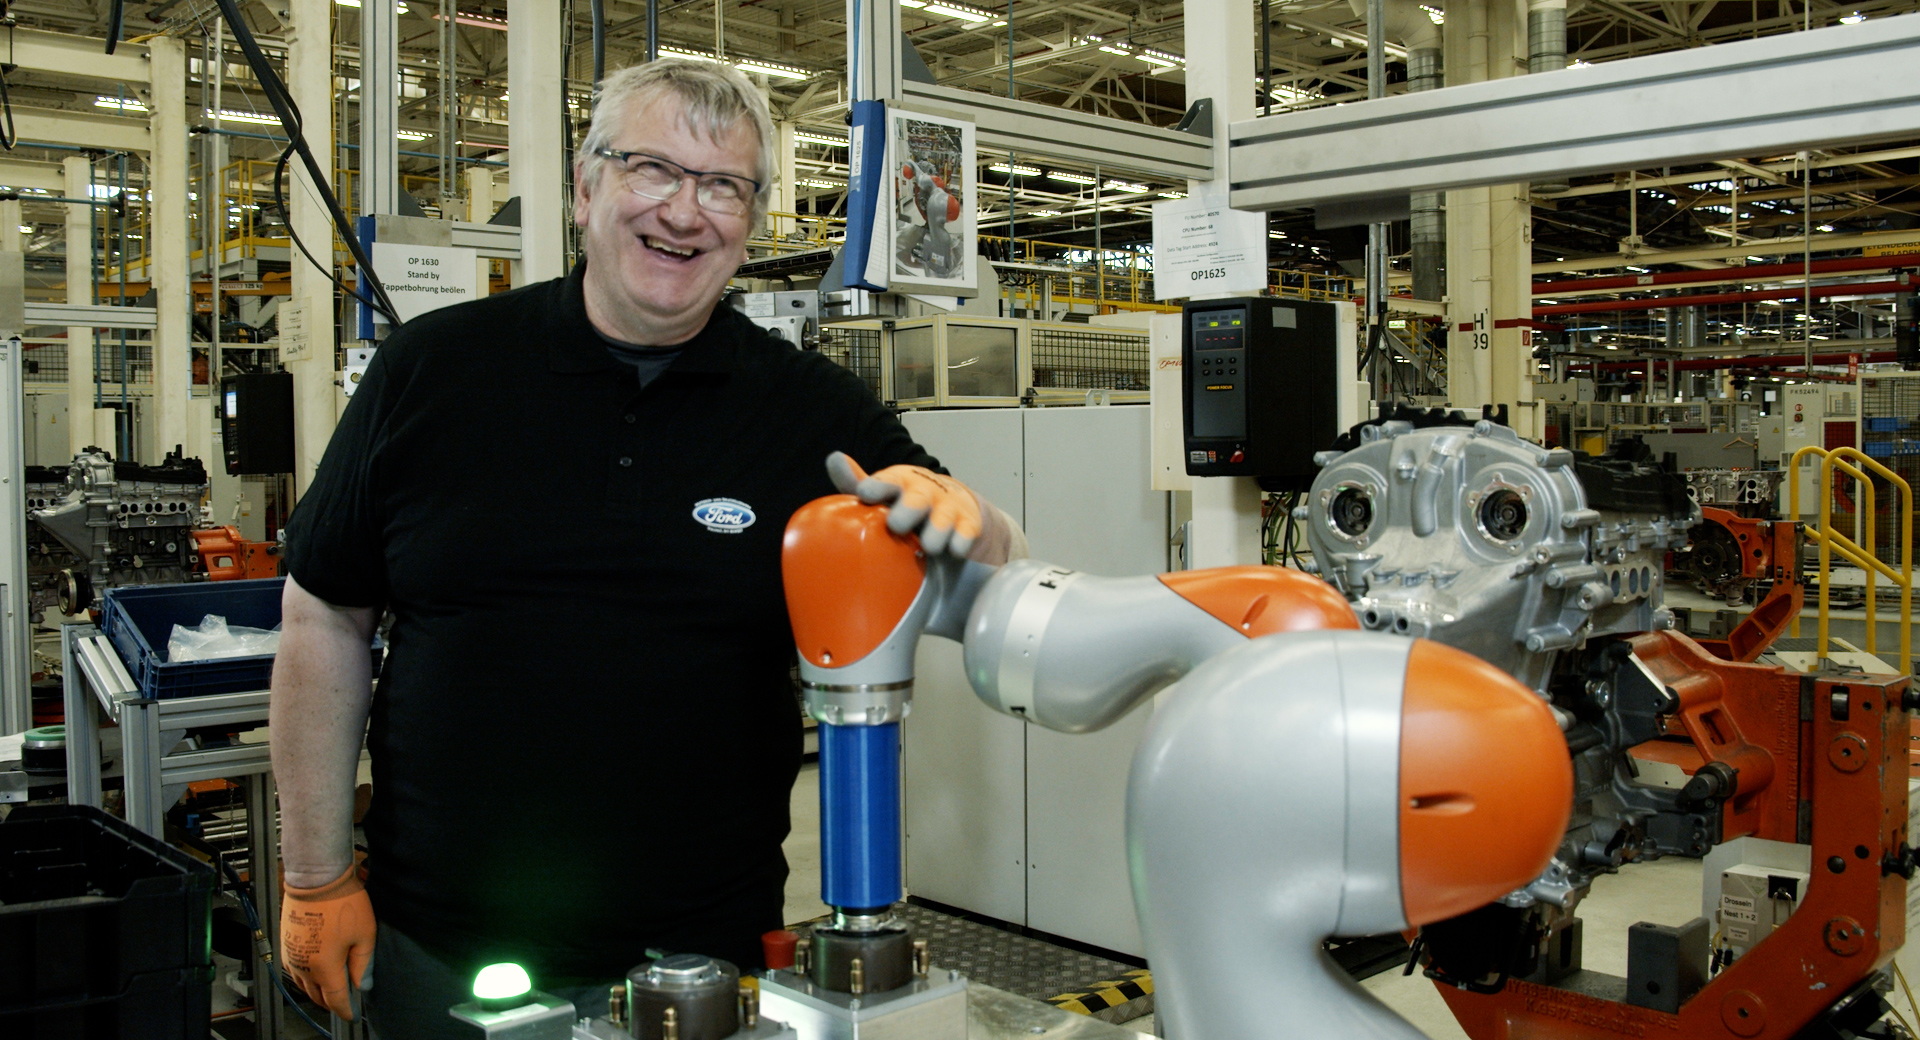  Ford Introduces ‘Robbie The Cobot’ That Can Work With People With Disabilities And Reduced Mobilty